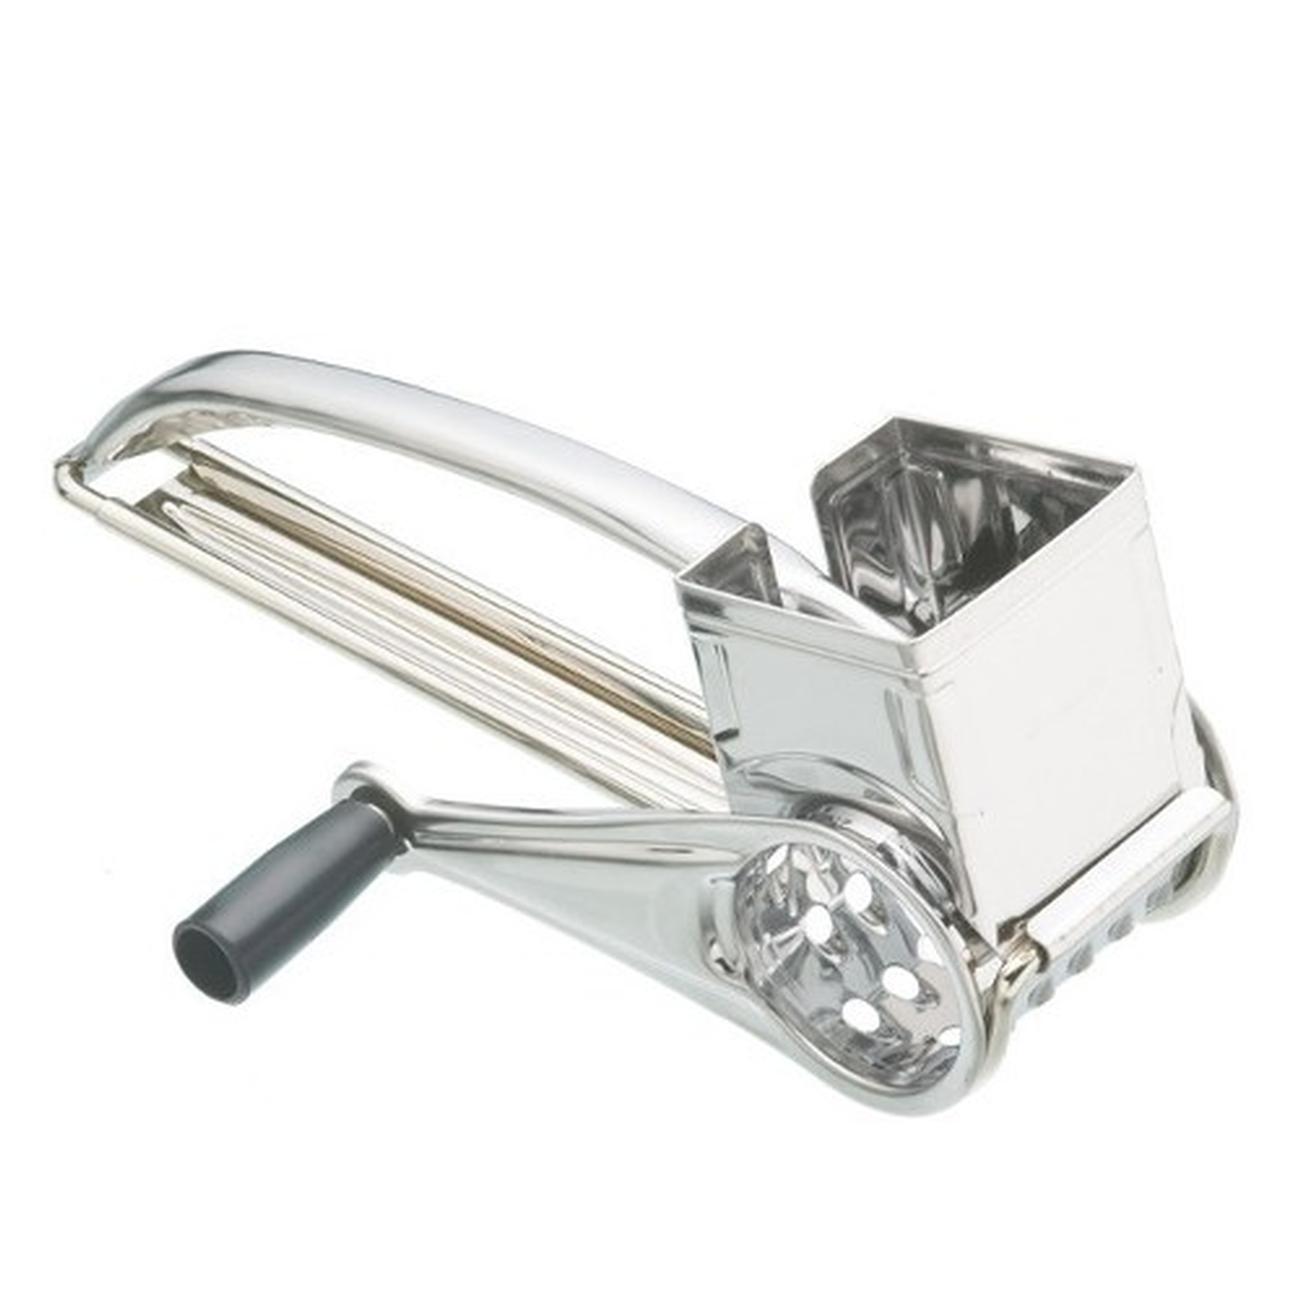 https://www.thekitchenwhisk.ie/contentfiles/productImages/Large/KitchenCraft-Stainless-Steel-Rotary-Cheese-Grater-3-Blades.jpg